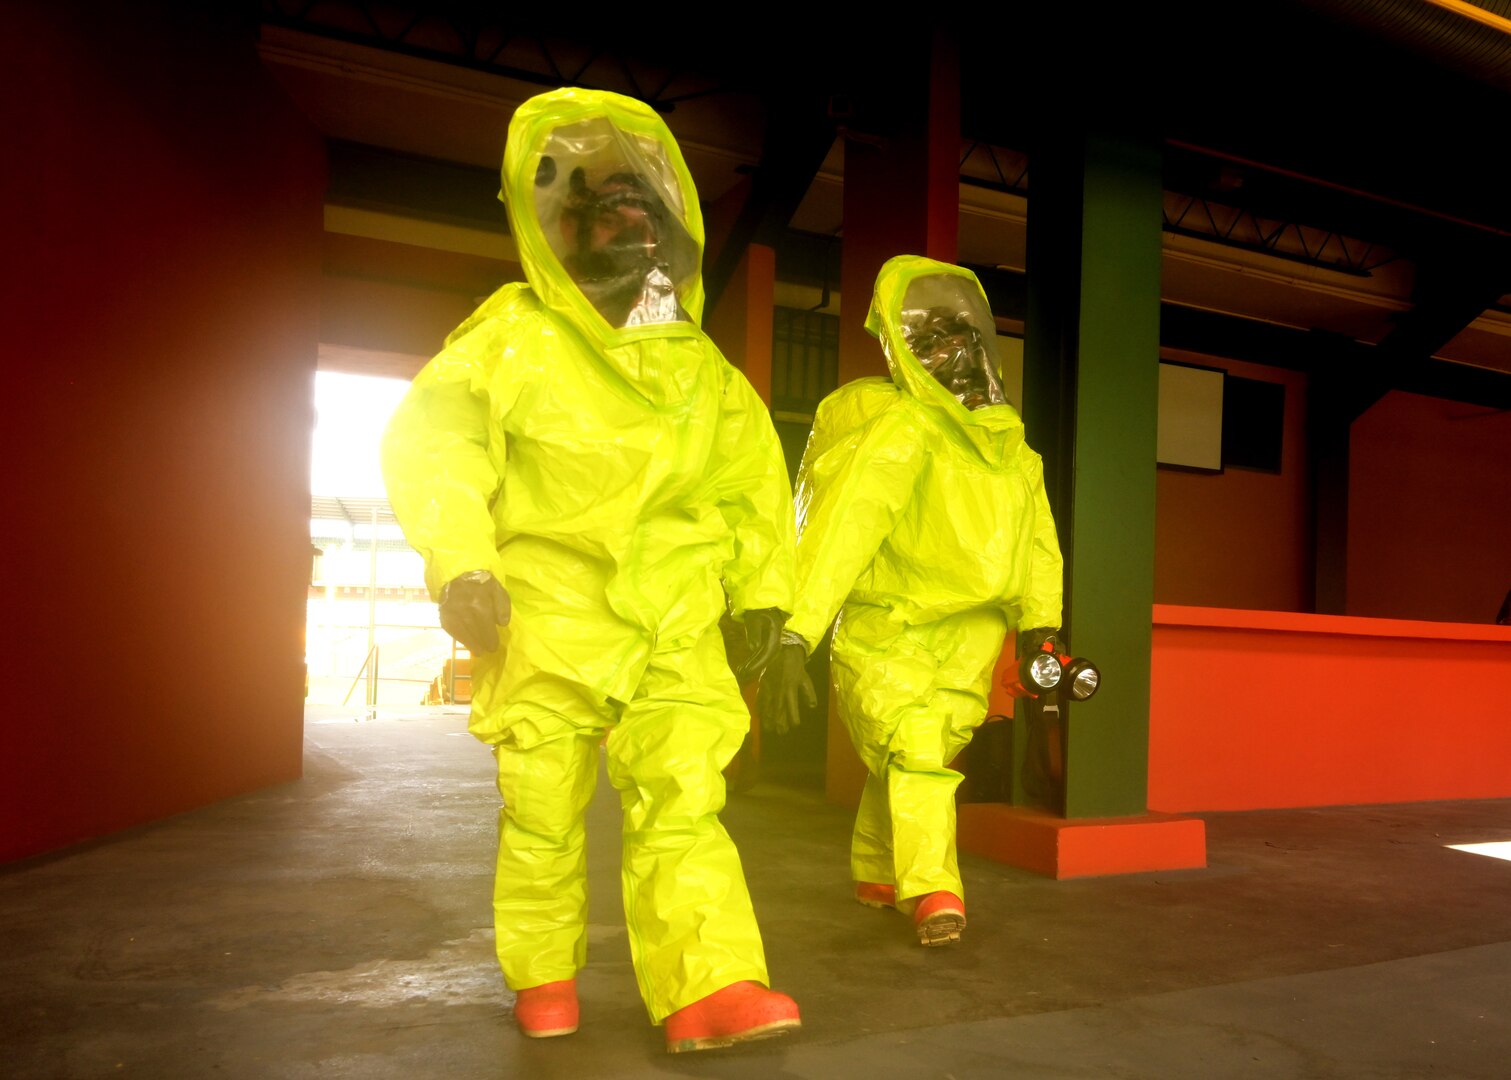 Weapons of Mass Destruction Civil Support Team members in protective equipment respond to a potential chemical, biological, or radiological threat while participating in a training event in the municipality of Carolina in Puerto Rico, Aug. 18, 2021. The training scenarios include response, evaluation, testing, and securing the area of contamination. The members are made up of soldiers and airmen from the 33rd WMD-CST, District of Columbia National Guard, along with other CST's from Texas, North Carolina, West Virginia, Puerto Rico and the District of Columbia Fire and Emergency Management Service.